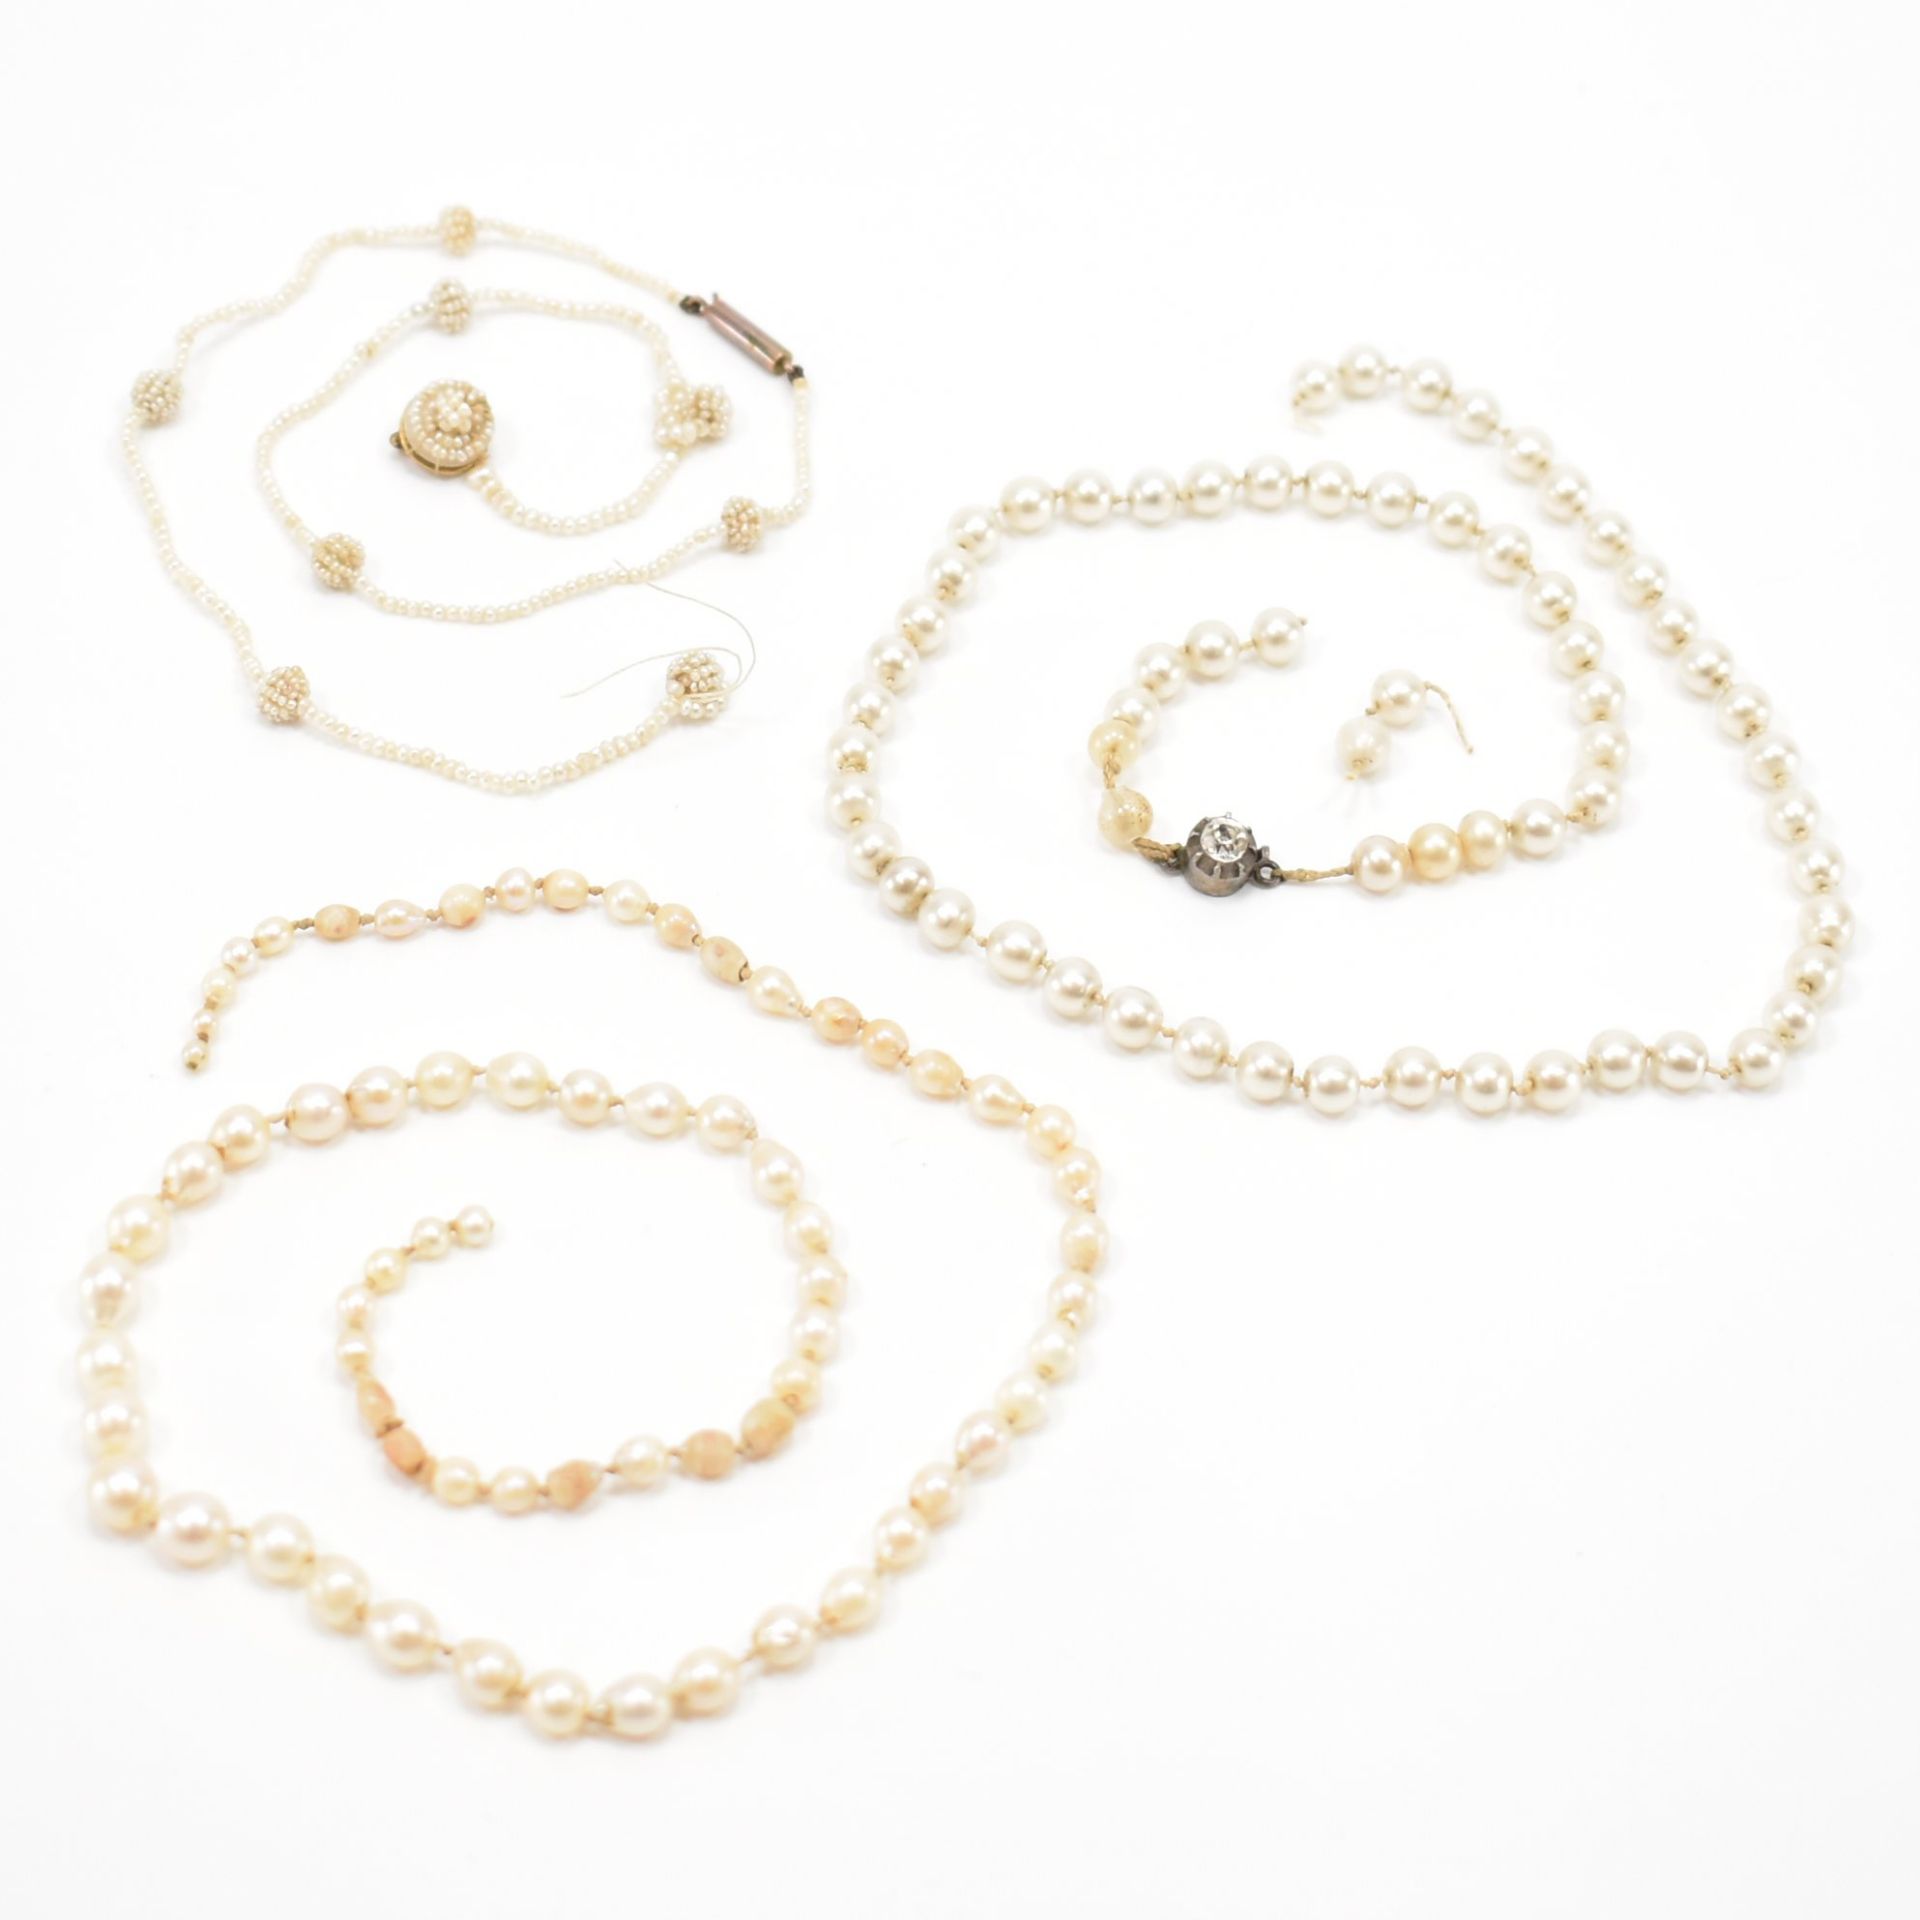 GROUP OF VICTORIAN PEARL NECKLACE FRAGMENTS - Image 5 of 5